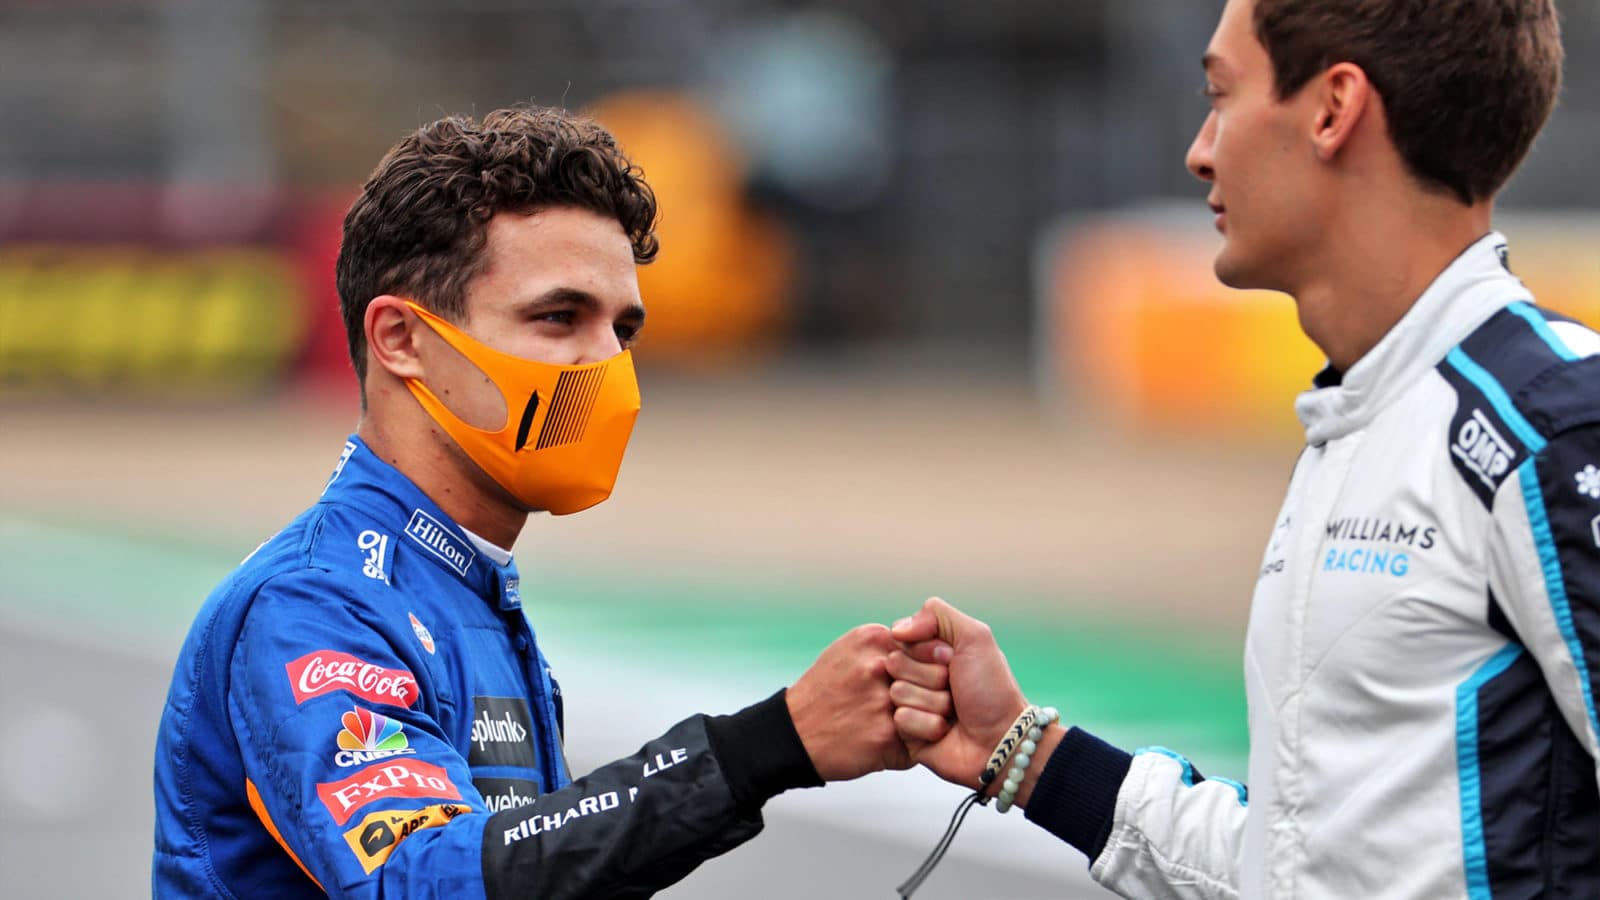 Lando Norris and George Russell bump fists at Silverstone 2021